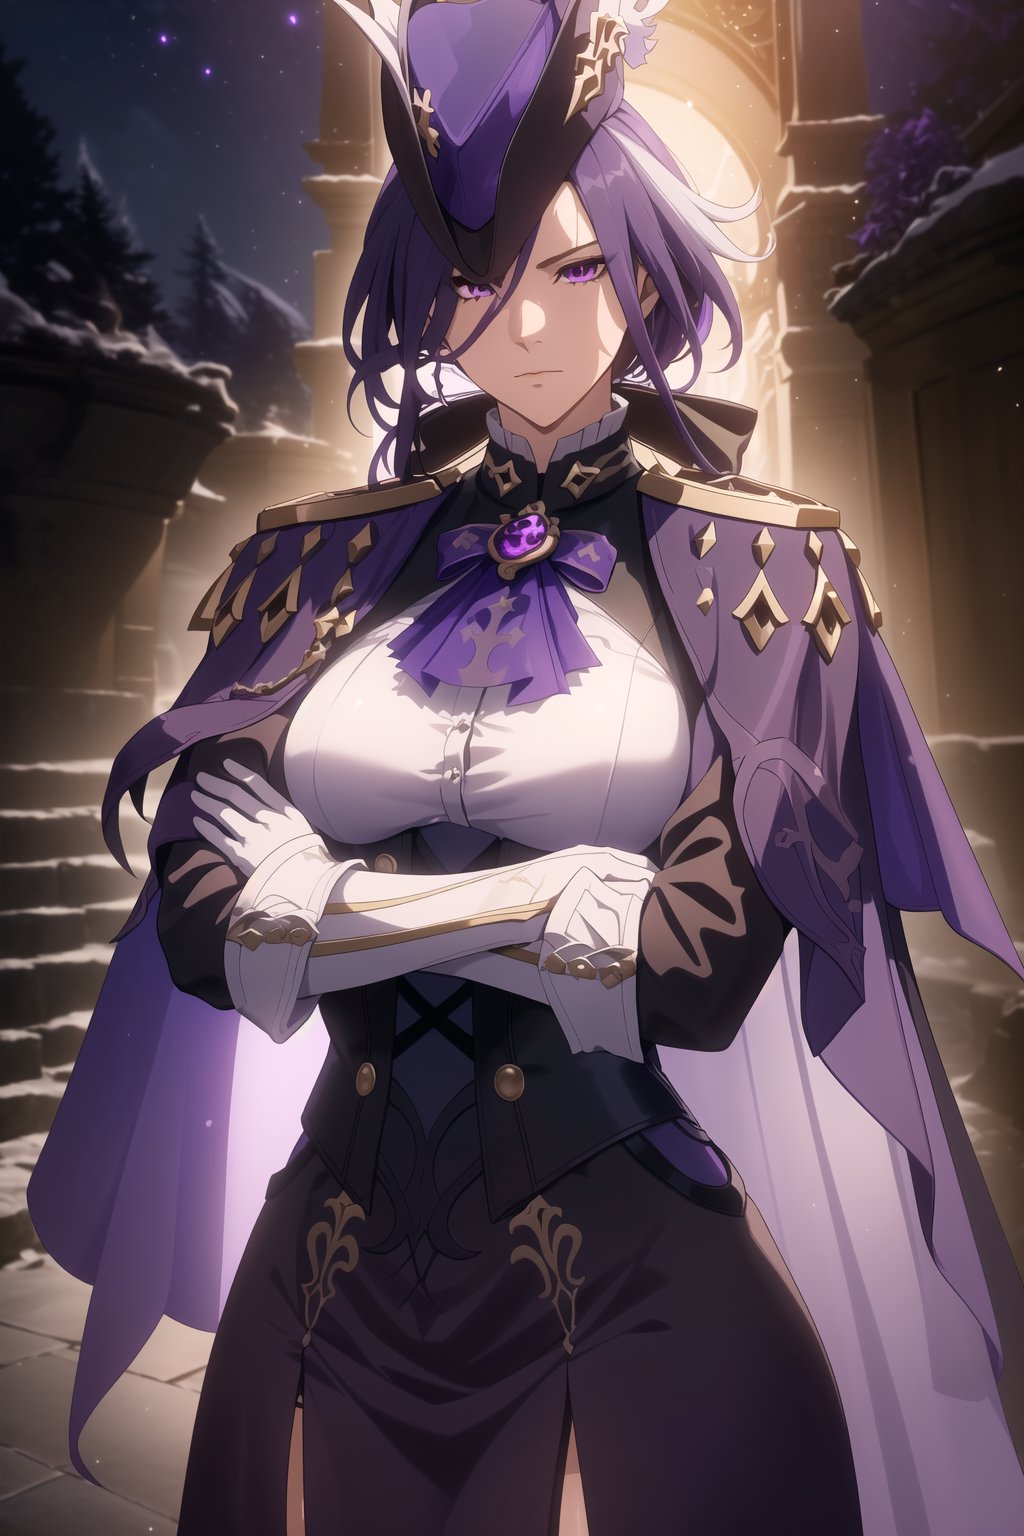 (Masterpiece, Best Quality), (Clorinde from Genshin Impact), (Long Purple Hair with Purple Musketeer Hat:1.4), (Purple Eyes:1.2), (Serious Looking:1.4), (Fair Skin), (Wearing White Shirt in Black Corset, White Gloves, and Violet Short Cape:1.6), (Moonlit Pine Forest at Night:1.4), (Crossed Arms Pose:1.4), Centered, (Half Body Shot:1.4), (From Front Shot:1.4), Insane Details, Intricate Face Detail, Intricate Hand Details, Cinematic Shot and Lighting, Realistic and Vibrant Colors, Sharp Focus, Ultra Detailed, Realistic Images, Depth of Field, Incredibly Realistic Environment and Scene, Master Composition and Cinematography, castlevania style,castlevania style,clorinde (genshin impact)